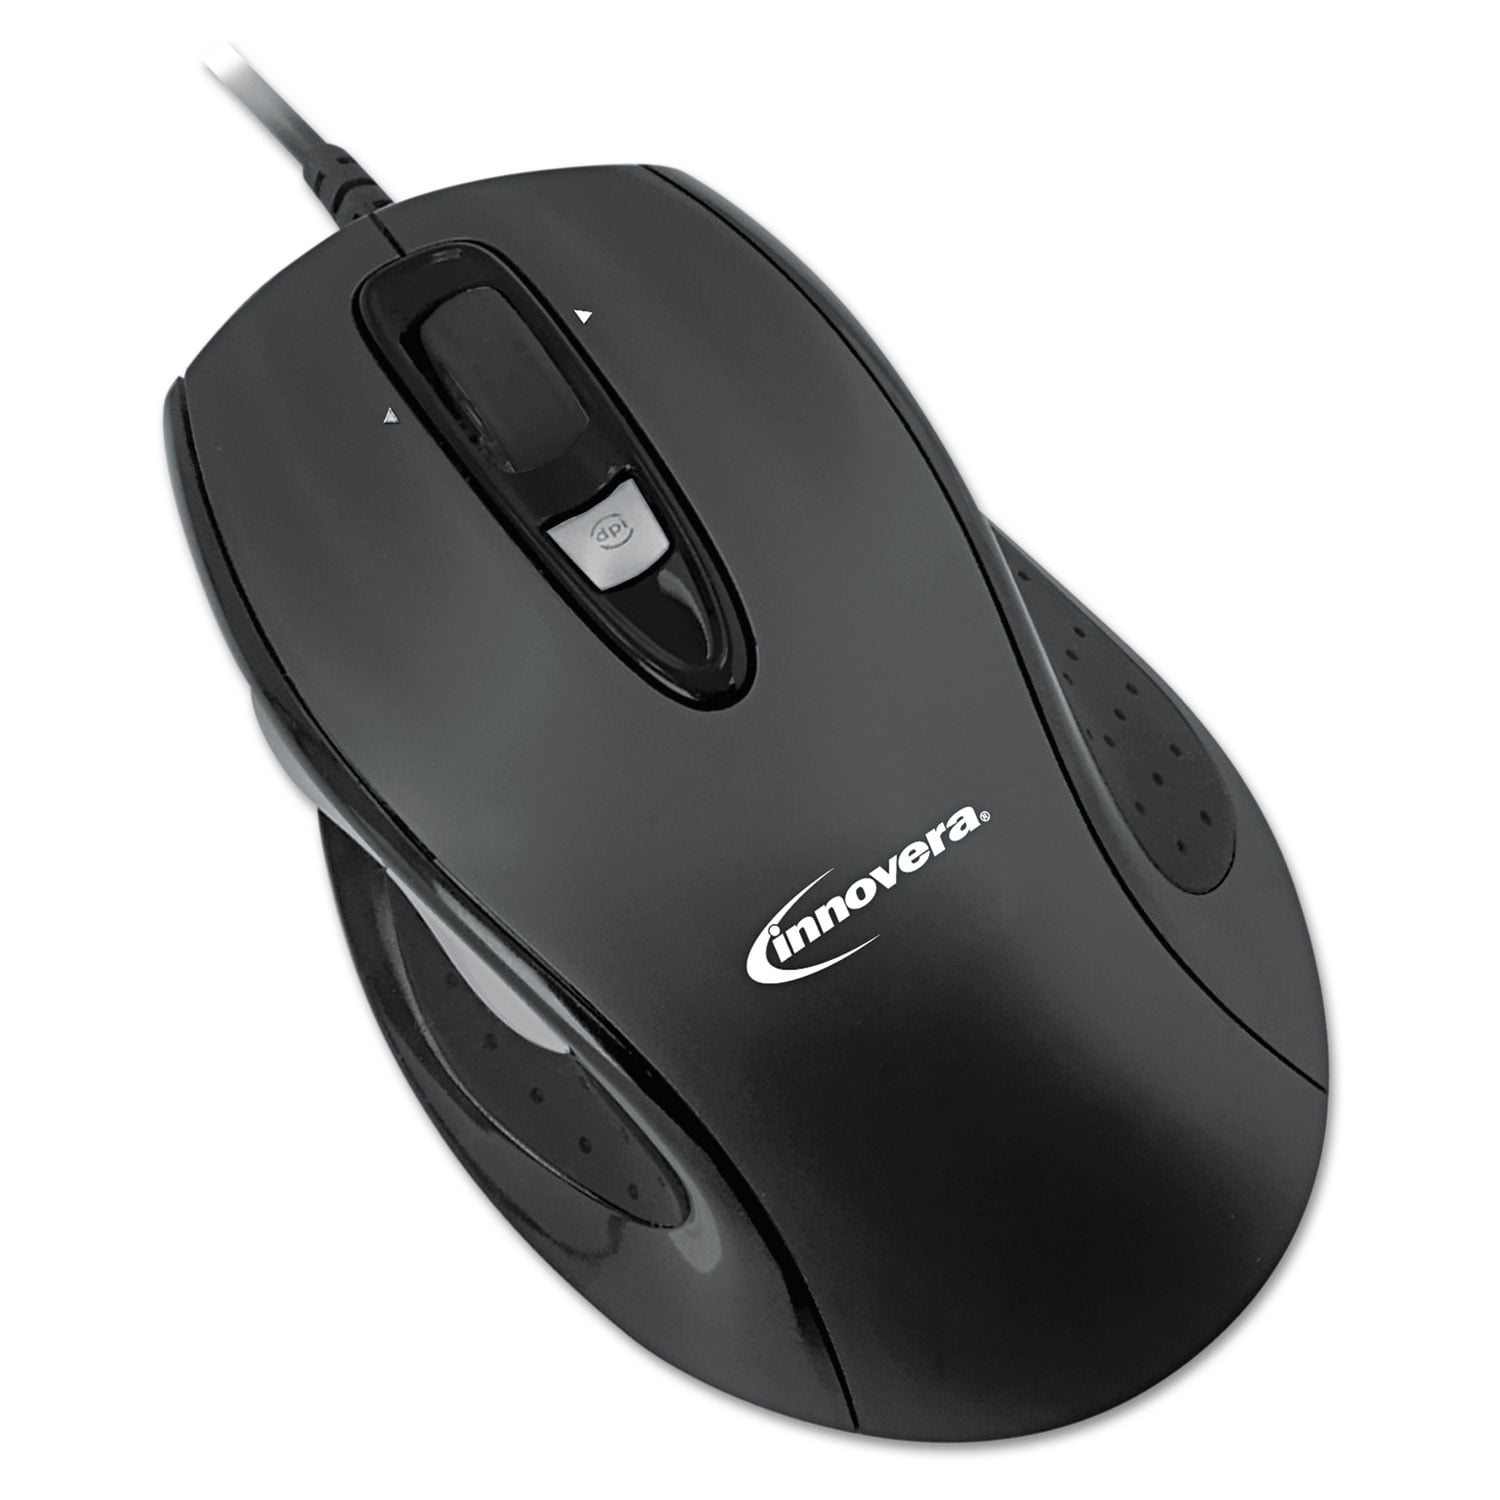 Basics 2.4 Ghz Wireless Optical Computer Mouse with USB Nano  Receiver, Black